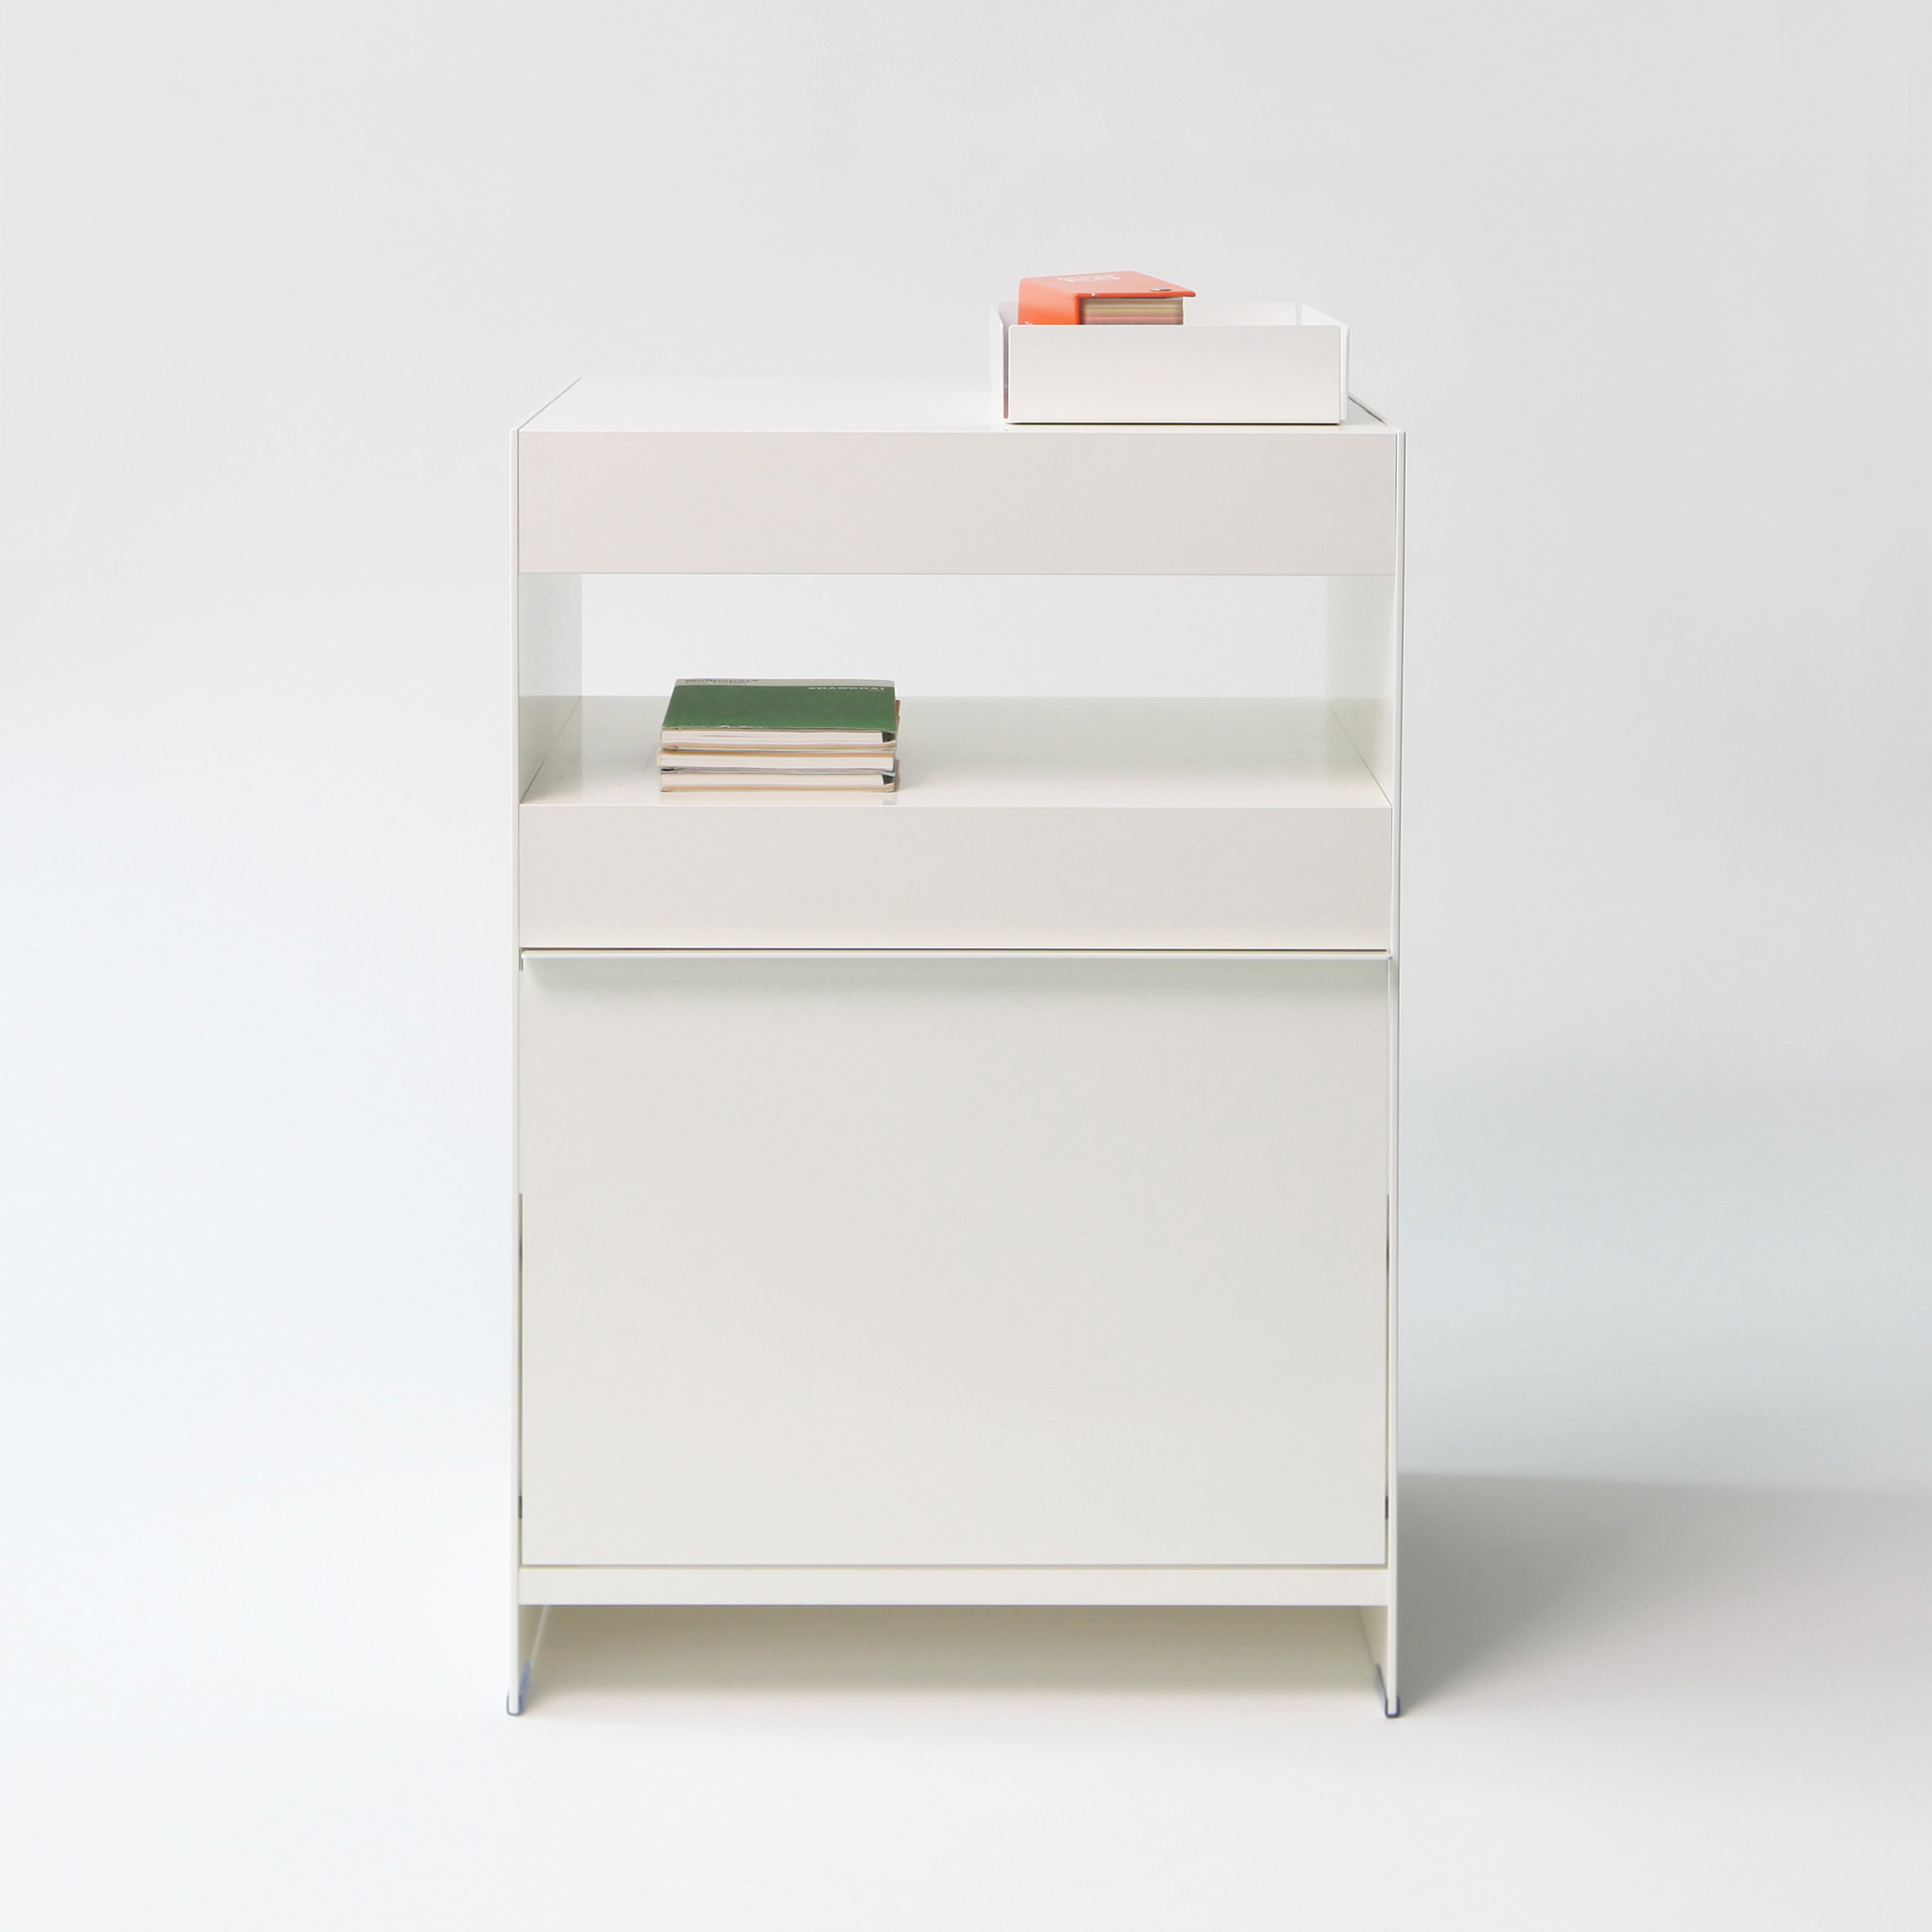 Large side table from ON&ON's freestanding shelving system